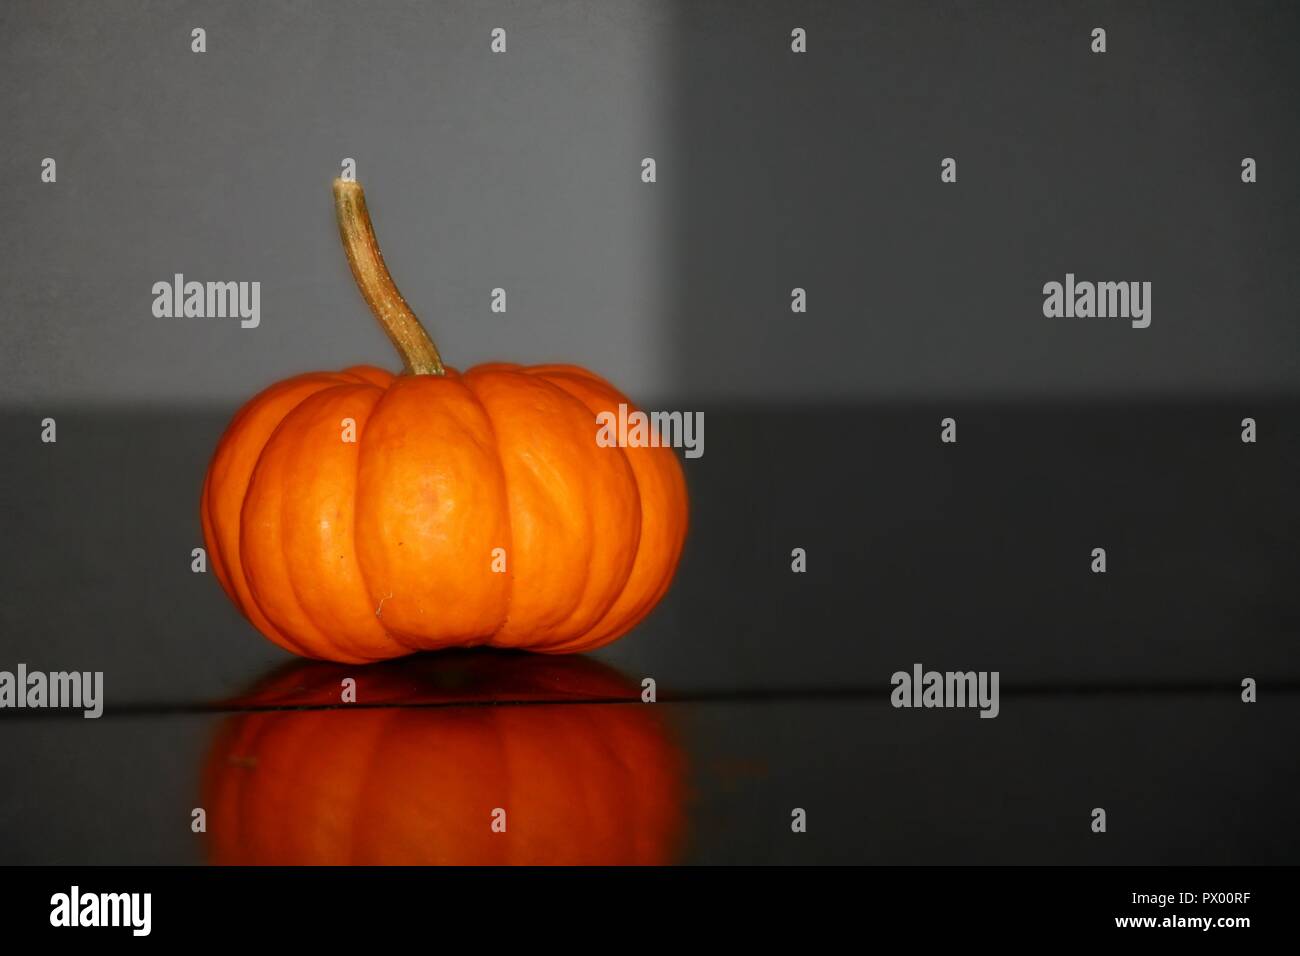 A miniature pumpkin sitting on wood with a reflection Stock Photo